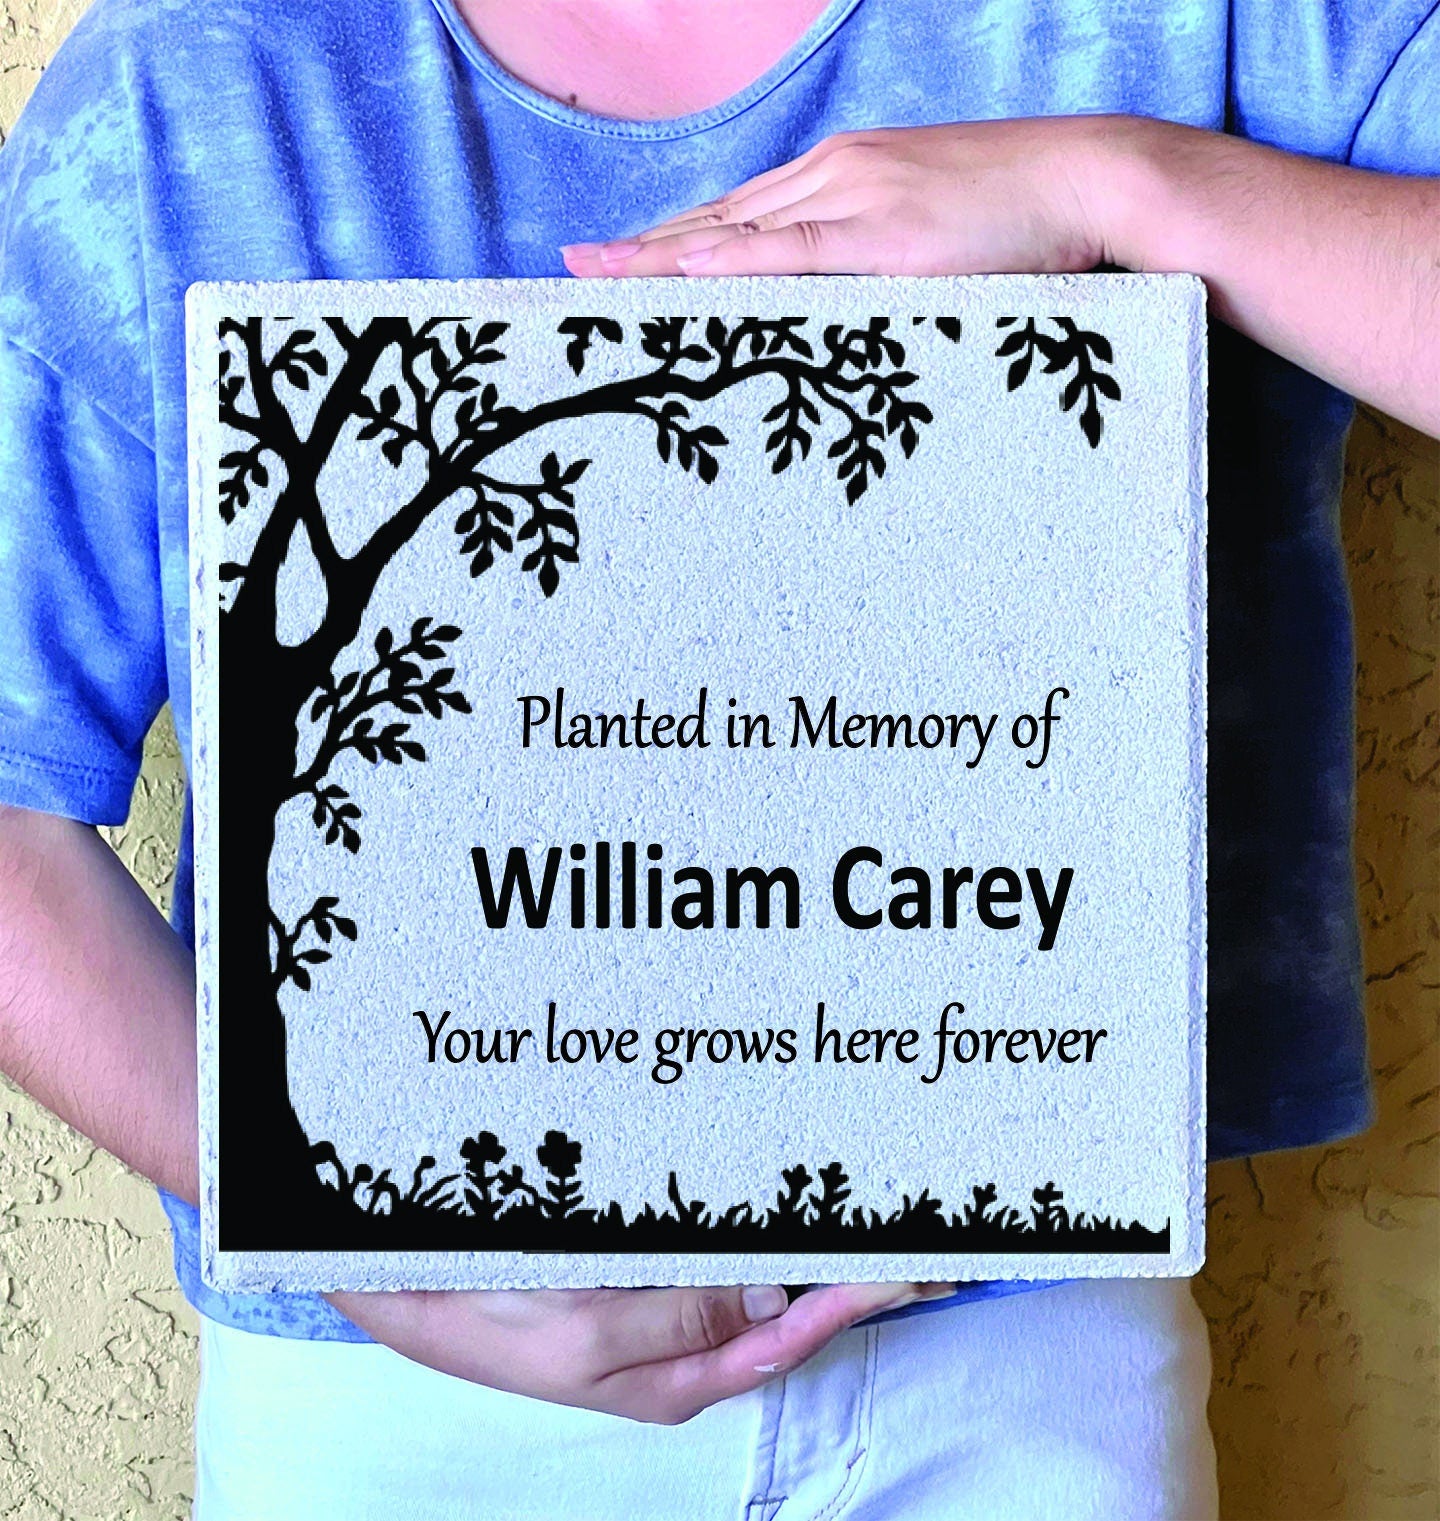 Planted in Memory of - Memorial Stone- Concrete Paver Memorial Marker - 12" x 12"  Personalized Tree Memorial Plaque -Your love grows here..